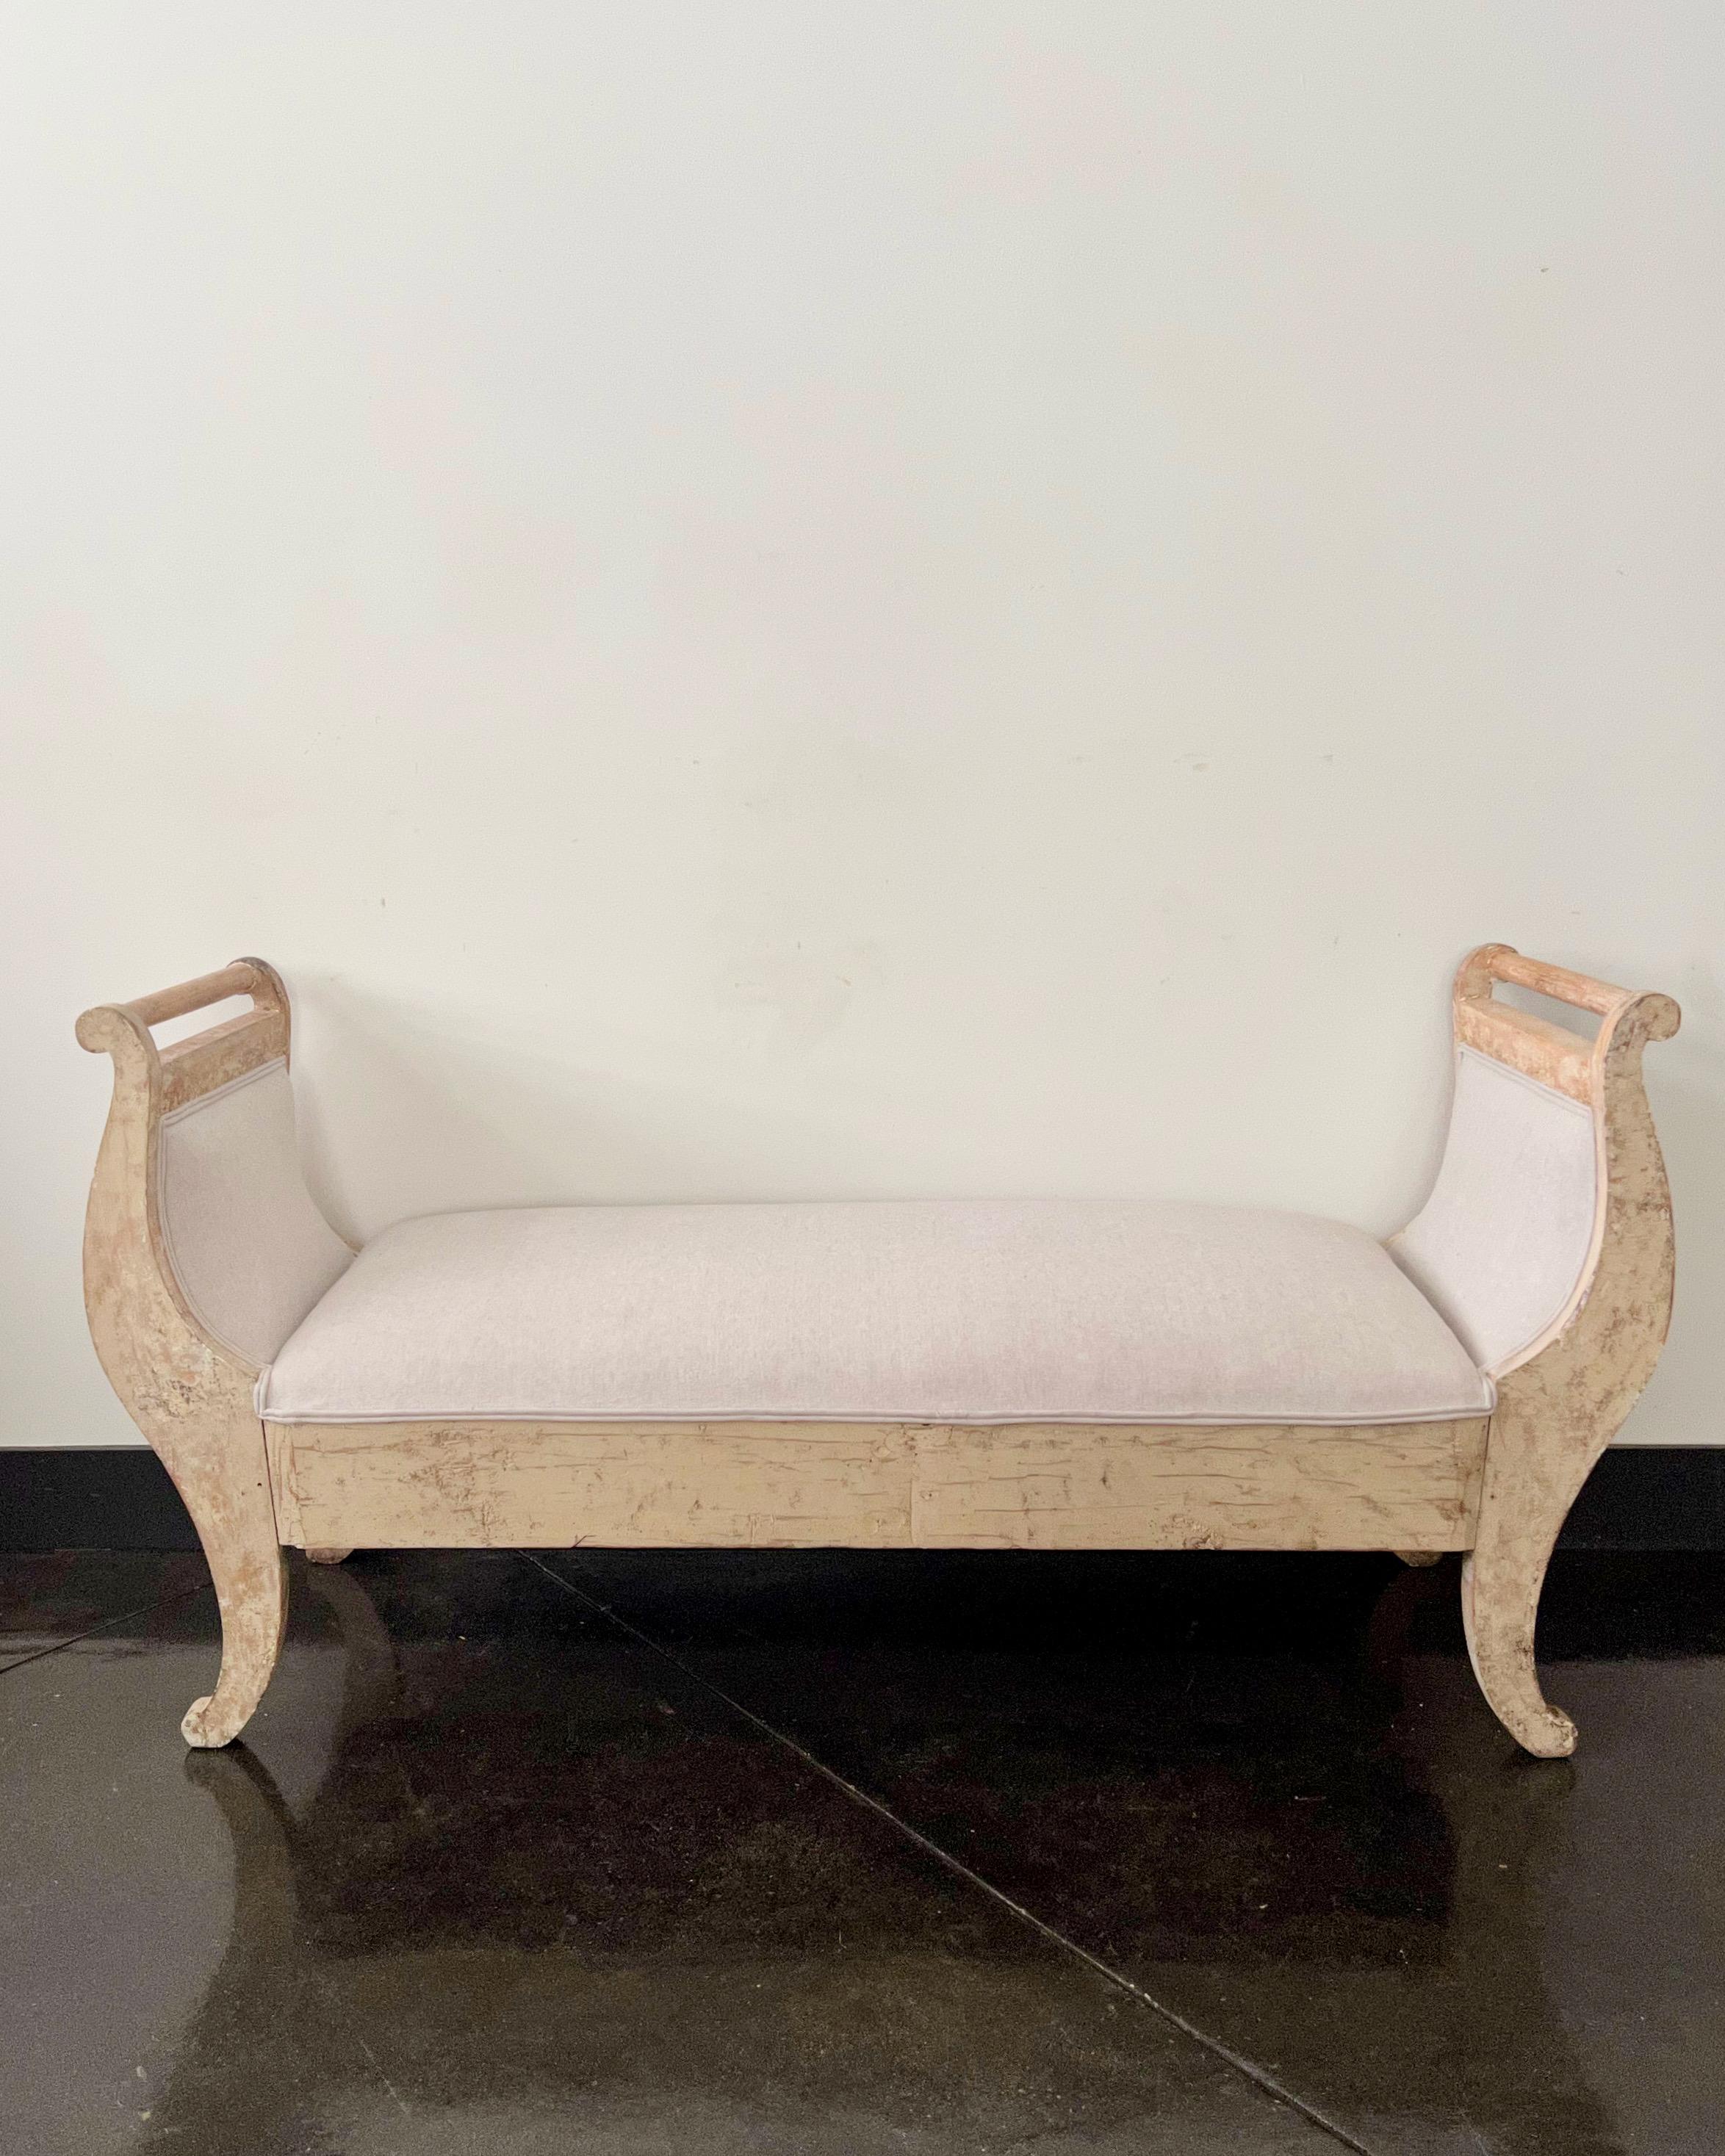 A charming small daybed / settee scraped to its most original finish and newly upholstered in linen. This bench has a timeless appeal for any setting.